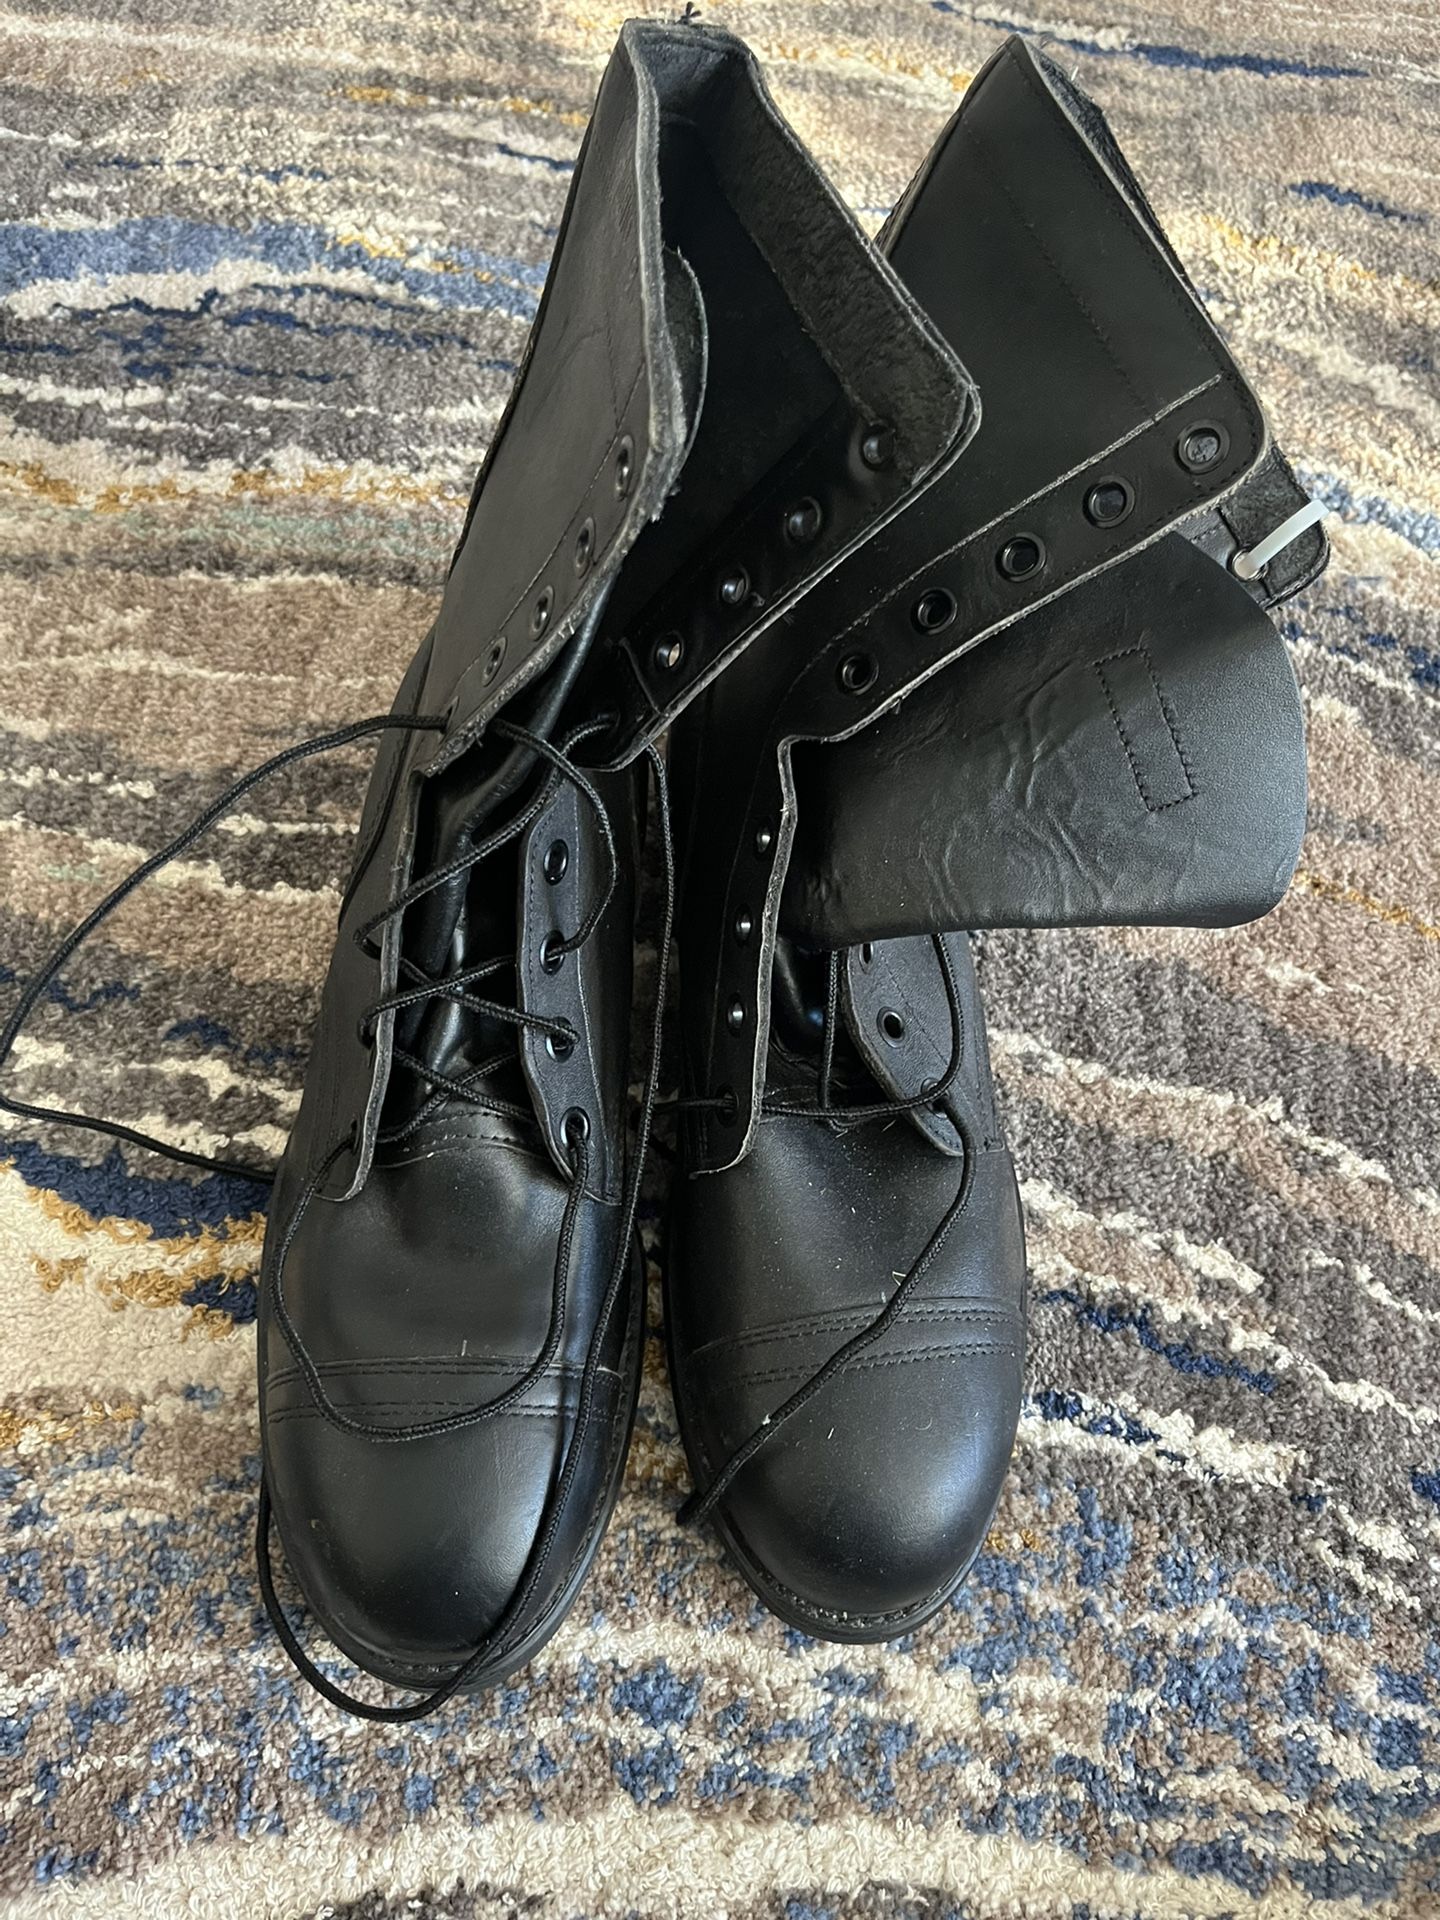 brand new military boots